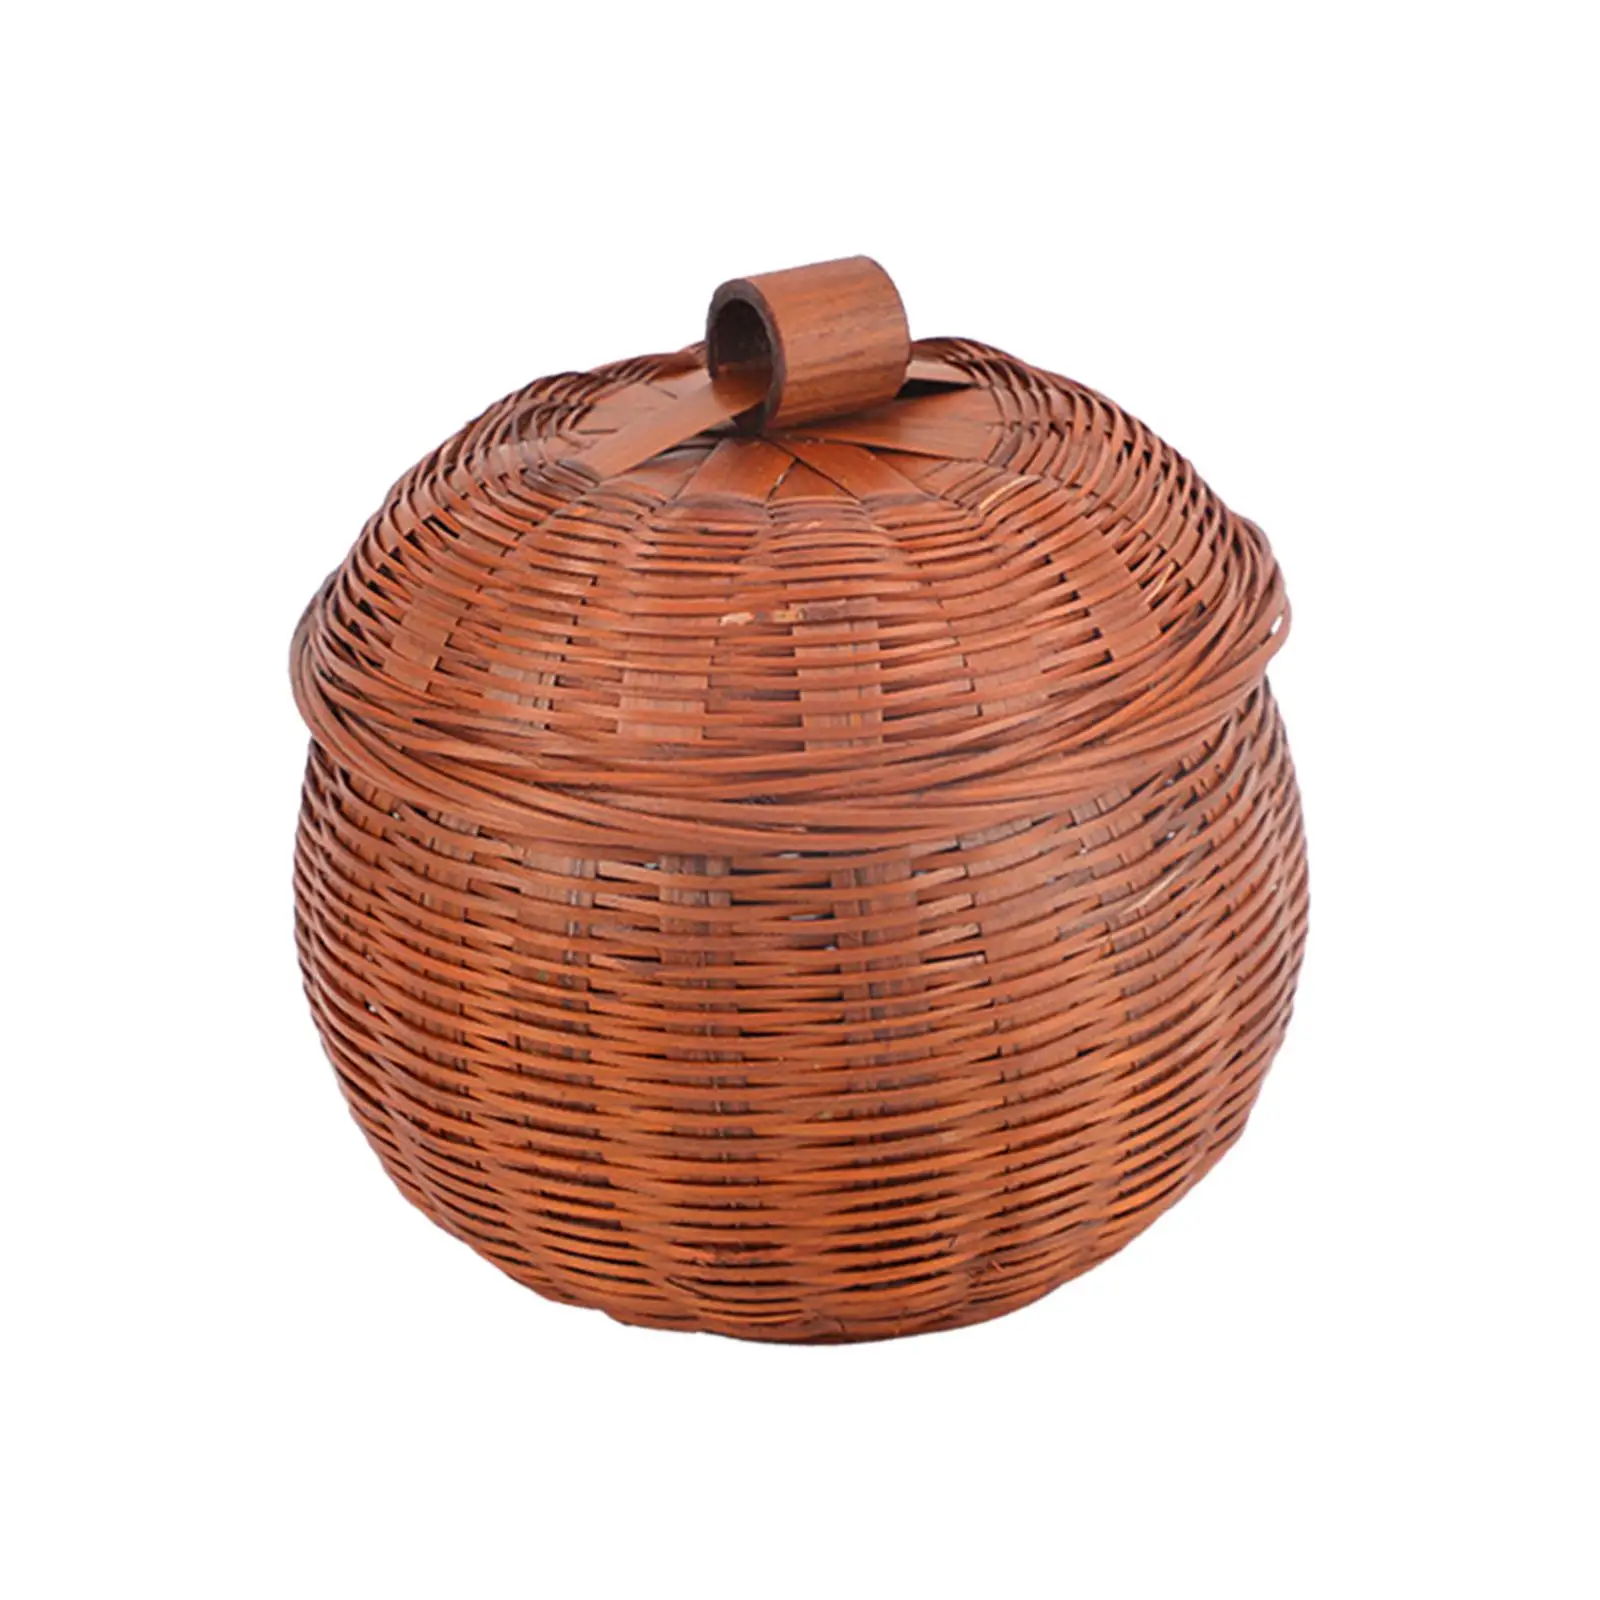 Round Rattan Storage Box Smooth with Cover Sundries Container Handwoven Pumpkin Basket for Cafe Cake Shops Family Home Offices